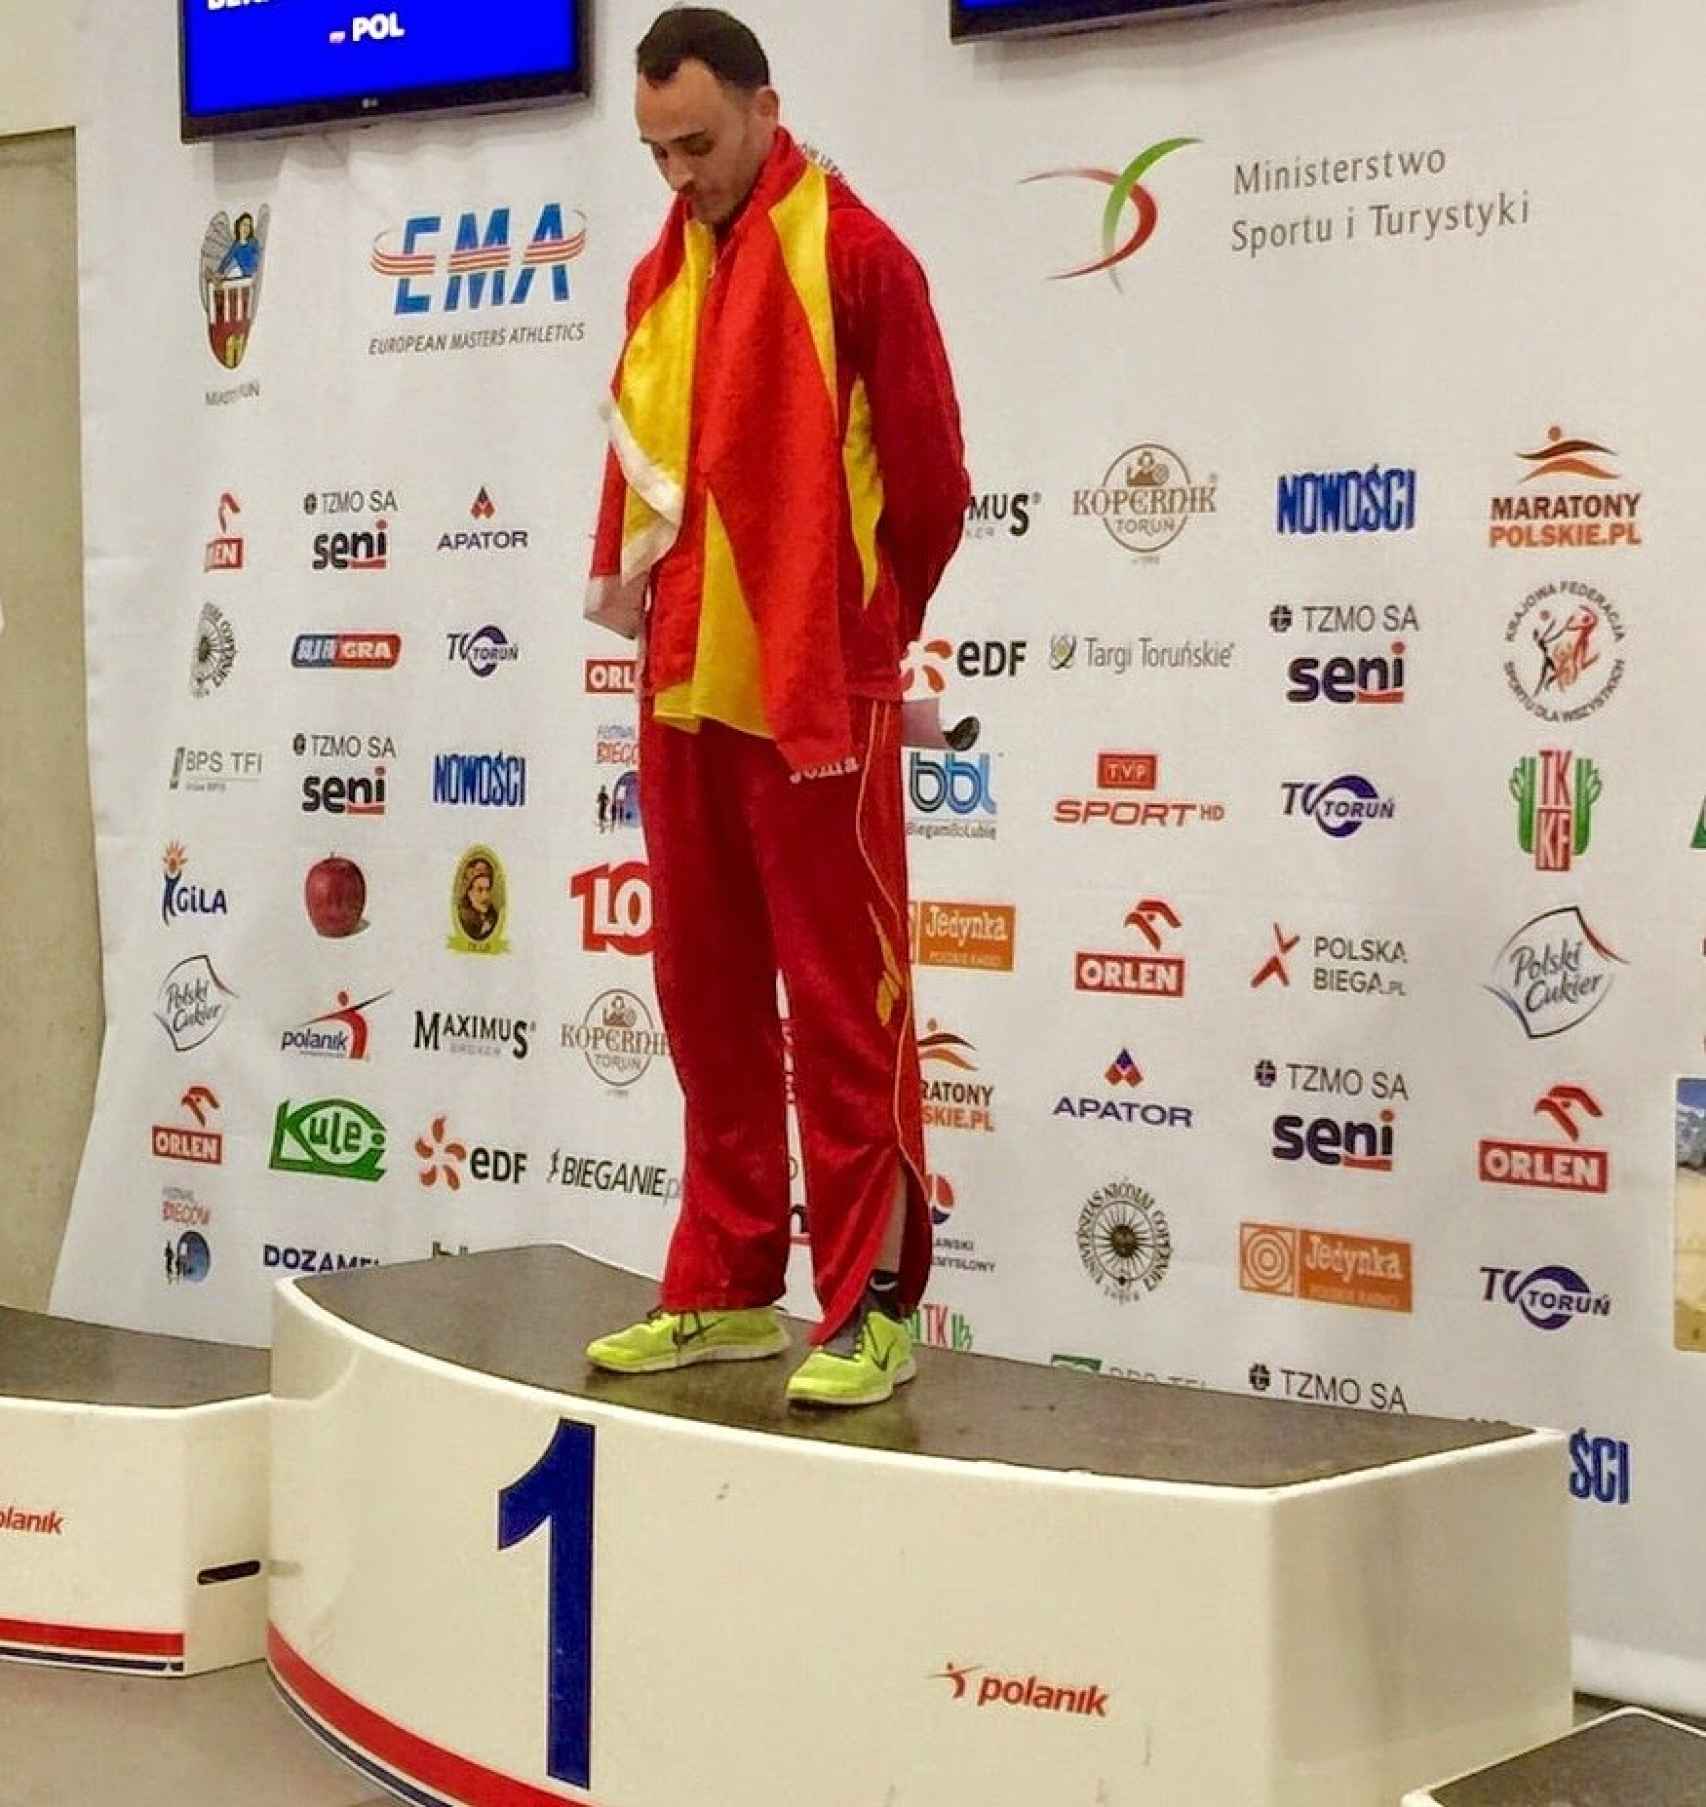 An image of the athlete with the Spanish flag.